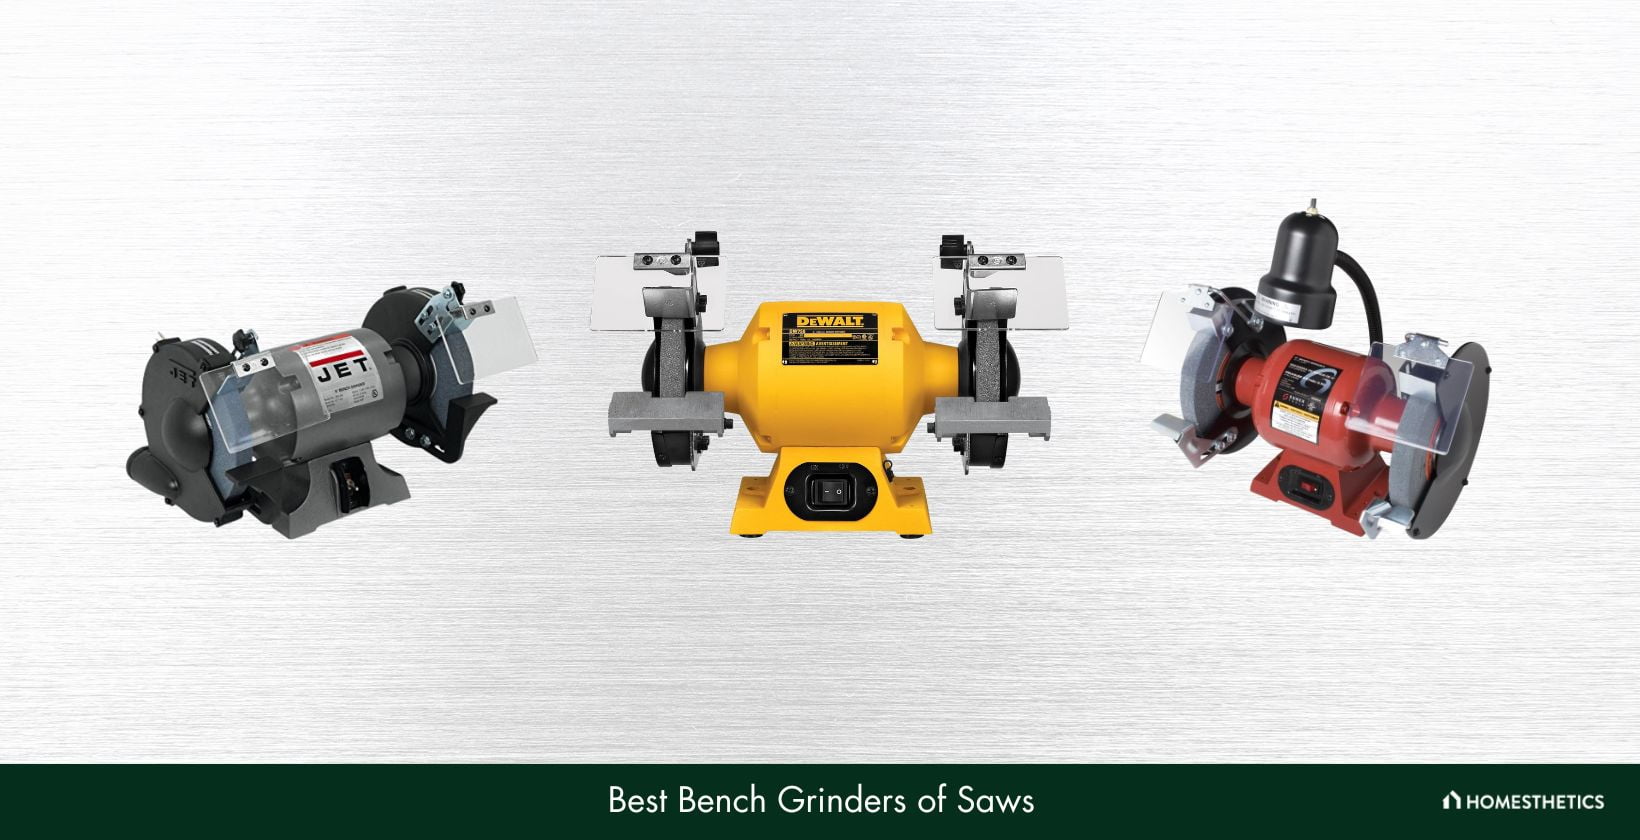 Best Bench Grinders of Saws